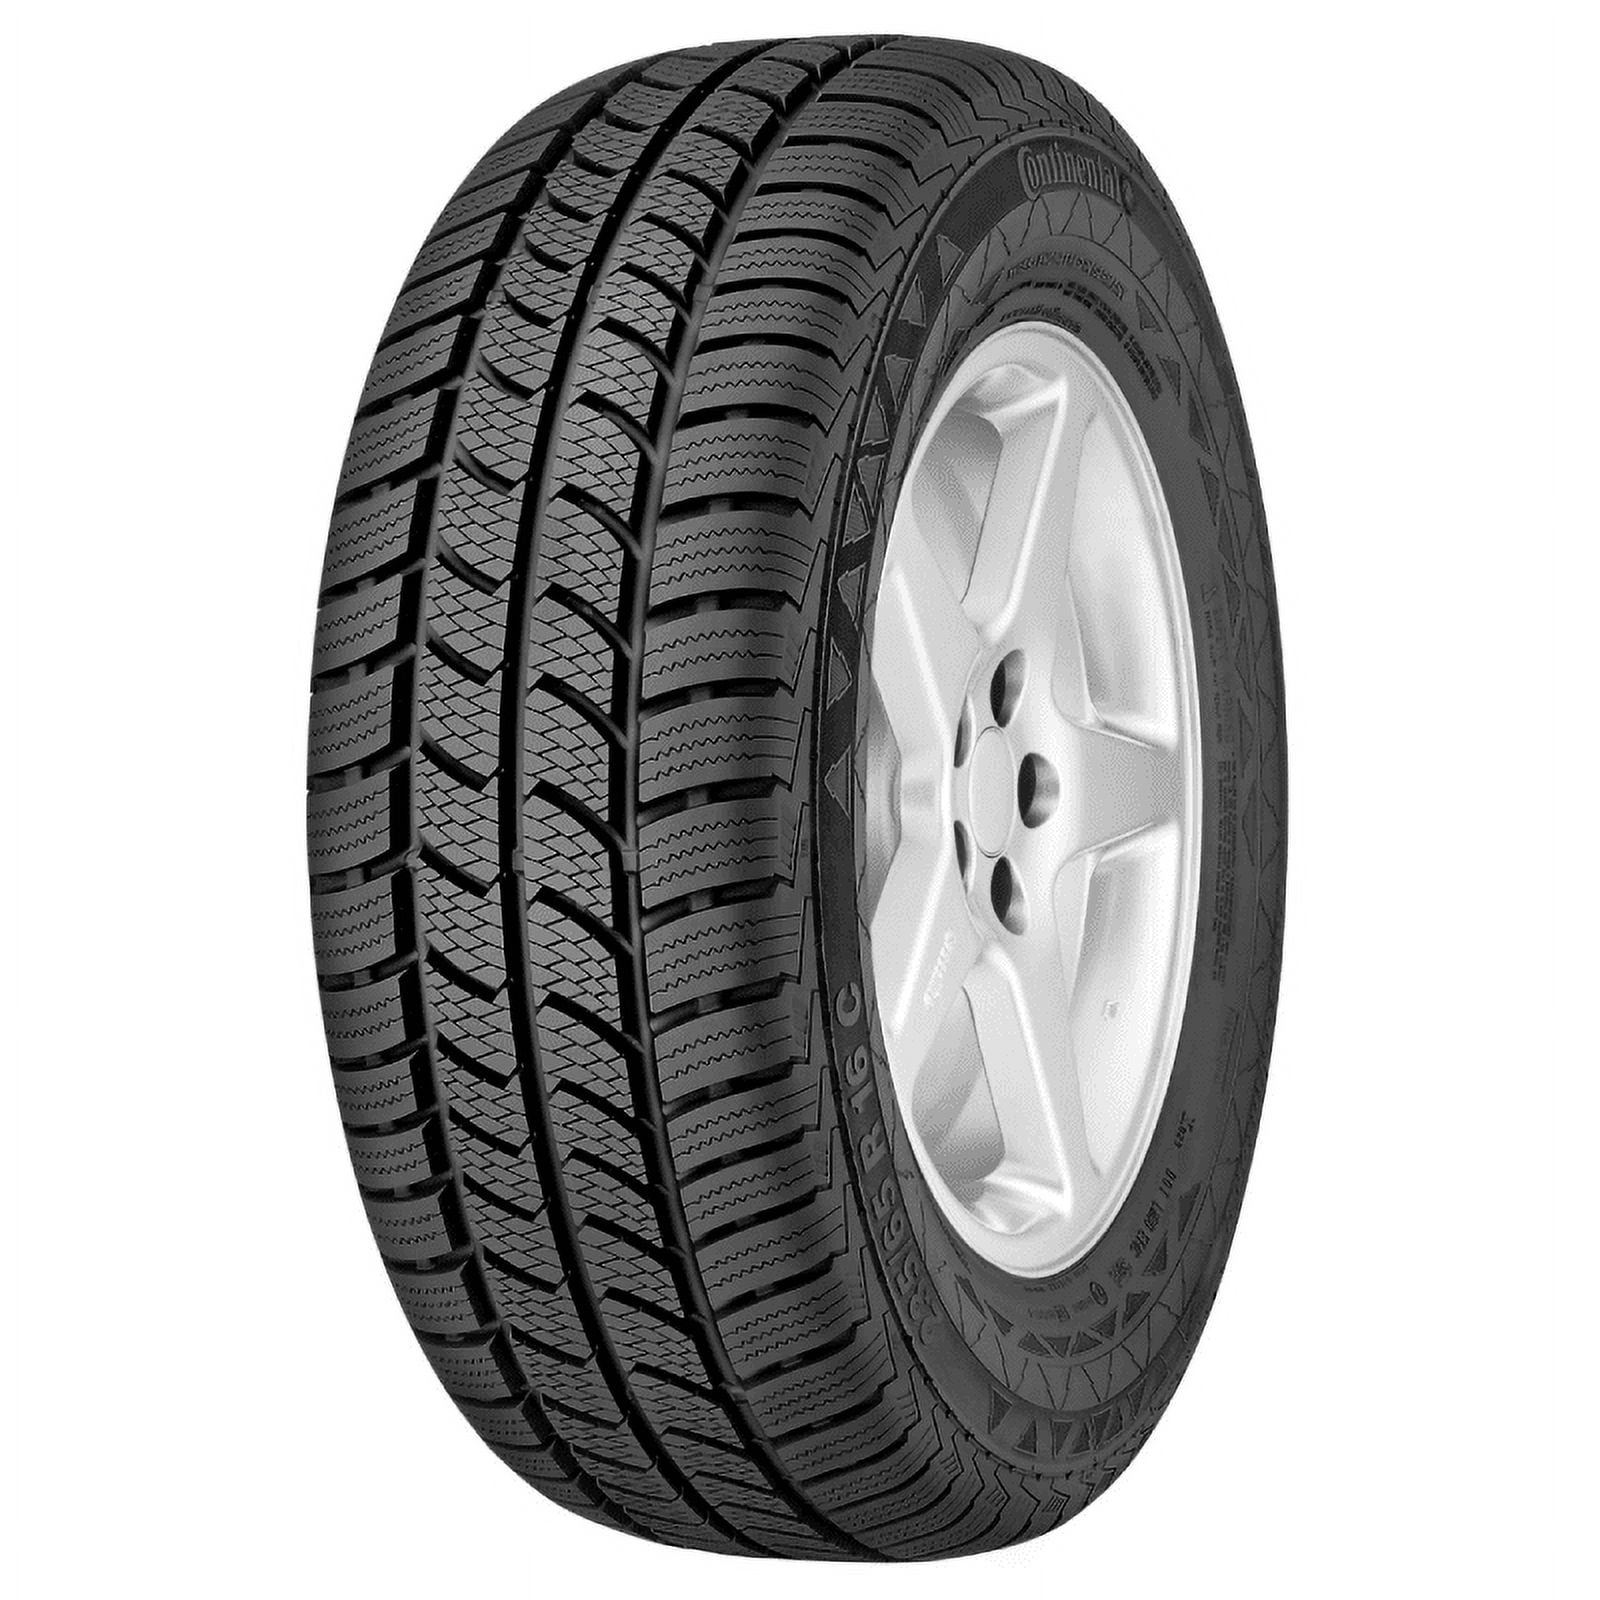 Continental VancoWinter 2 225/70R15C/8 BW Winter Studless Tire